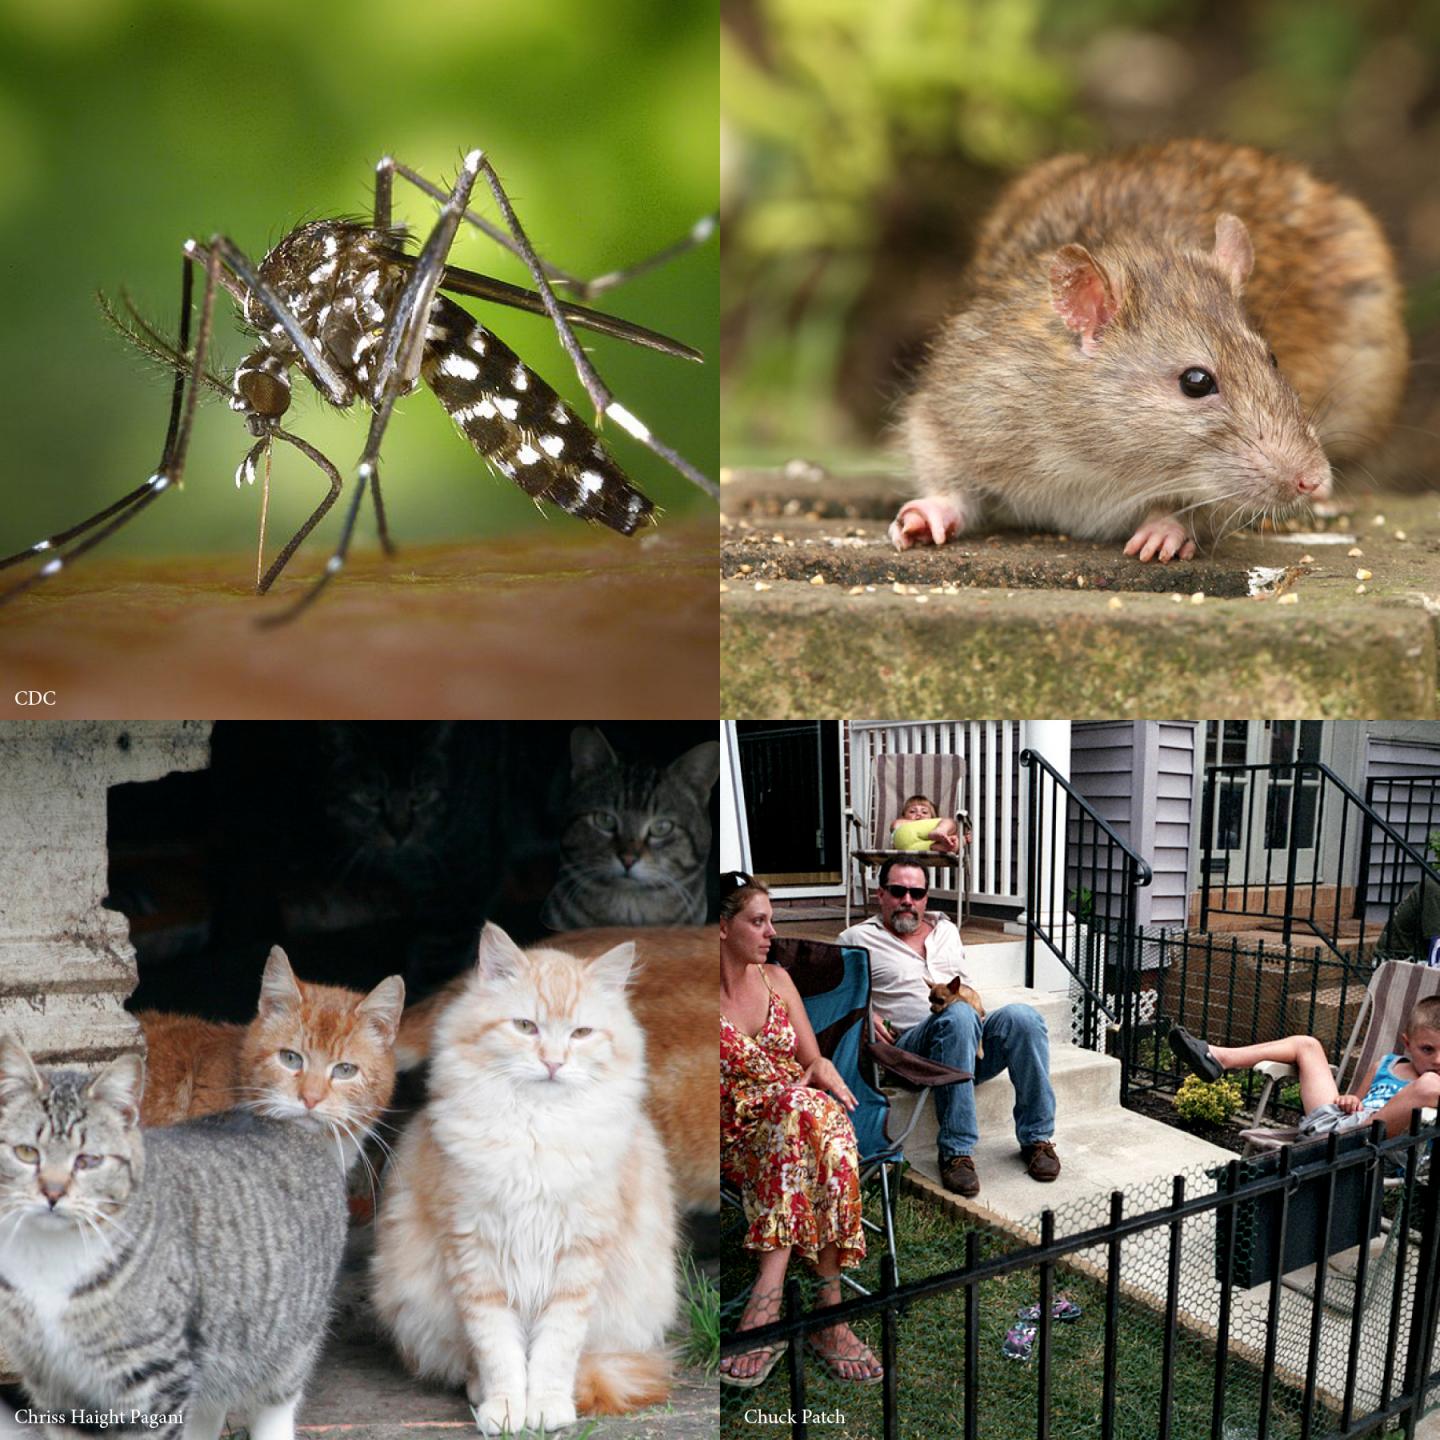 Mosquitoes, Rats, Cats, & People